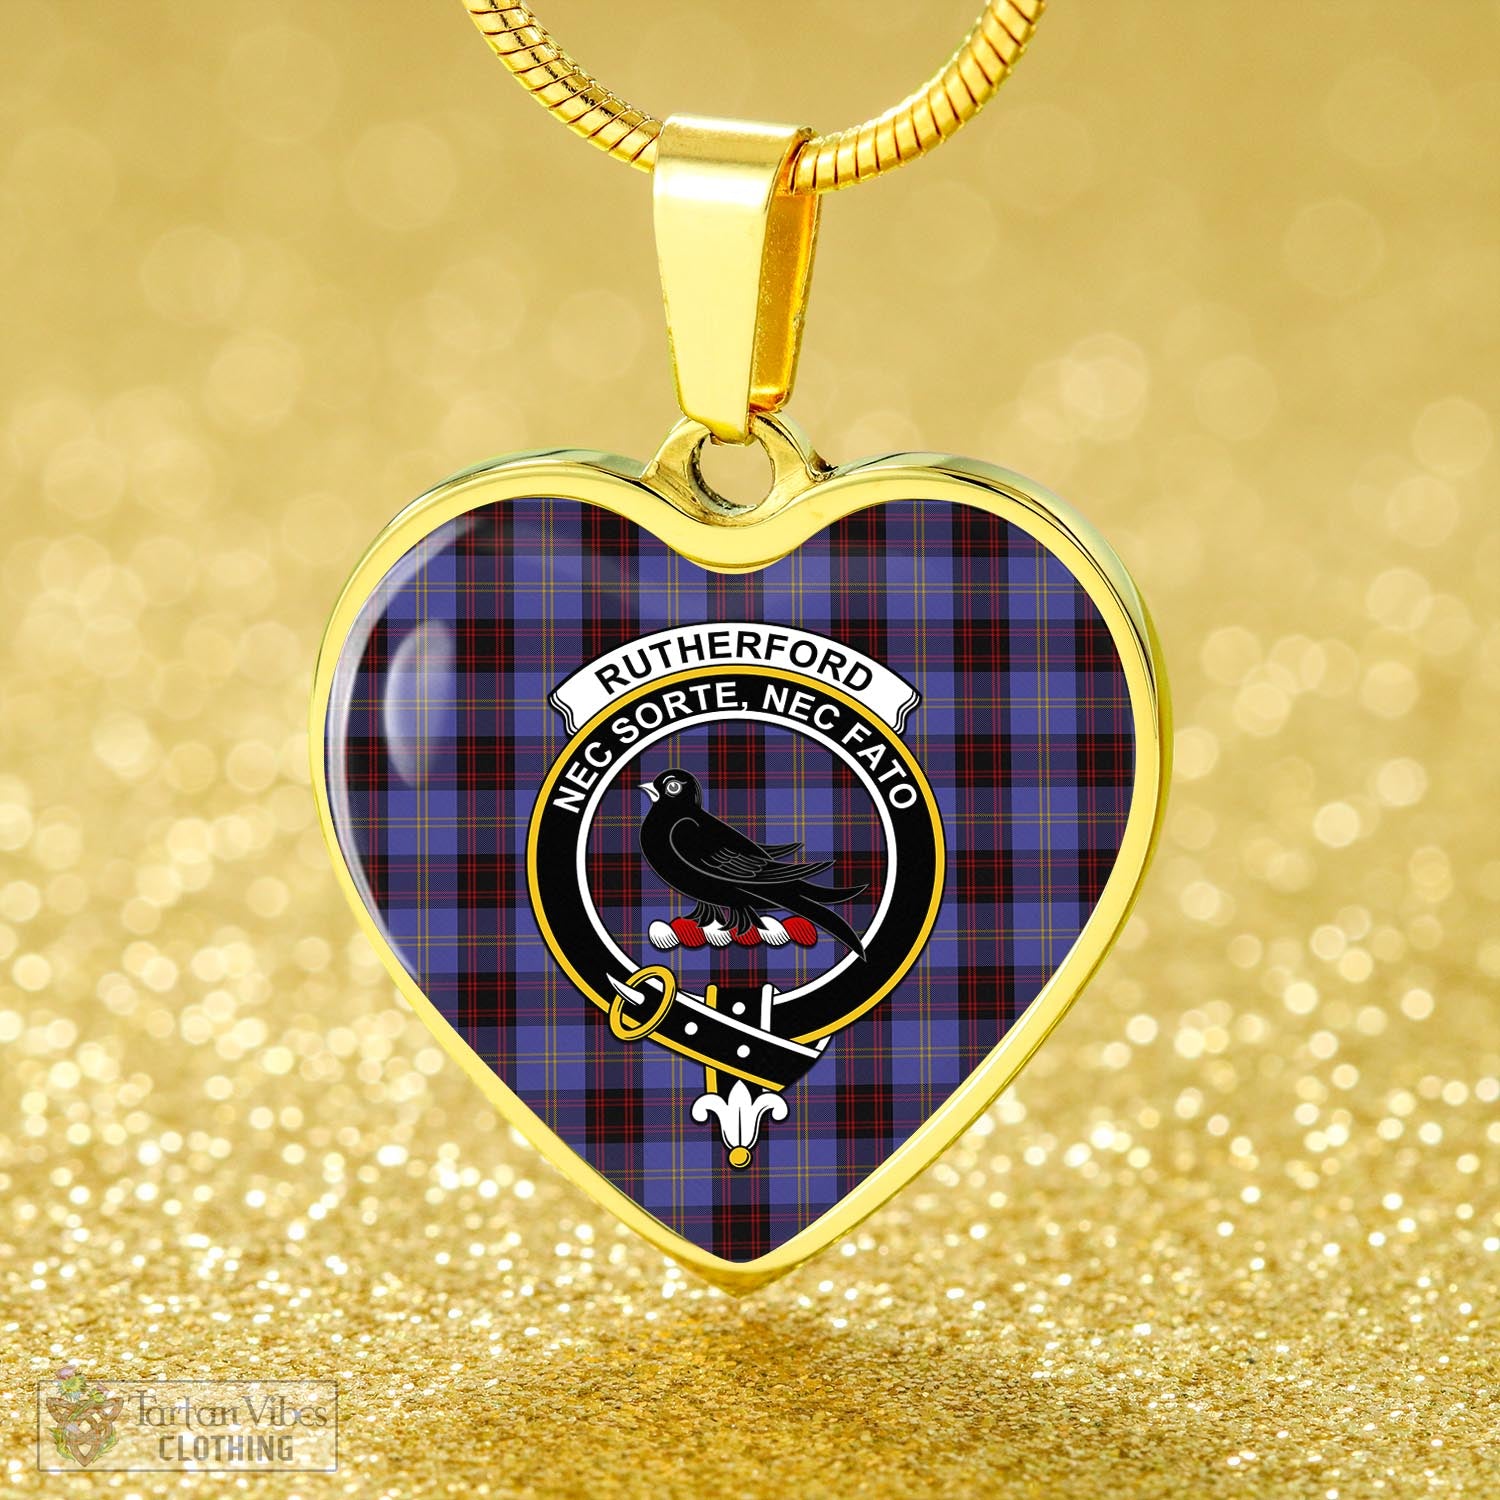 Tartan Vibes Clothing Rutherford Tartan Heart Necklace with Family Crest